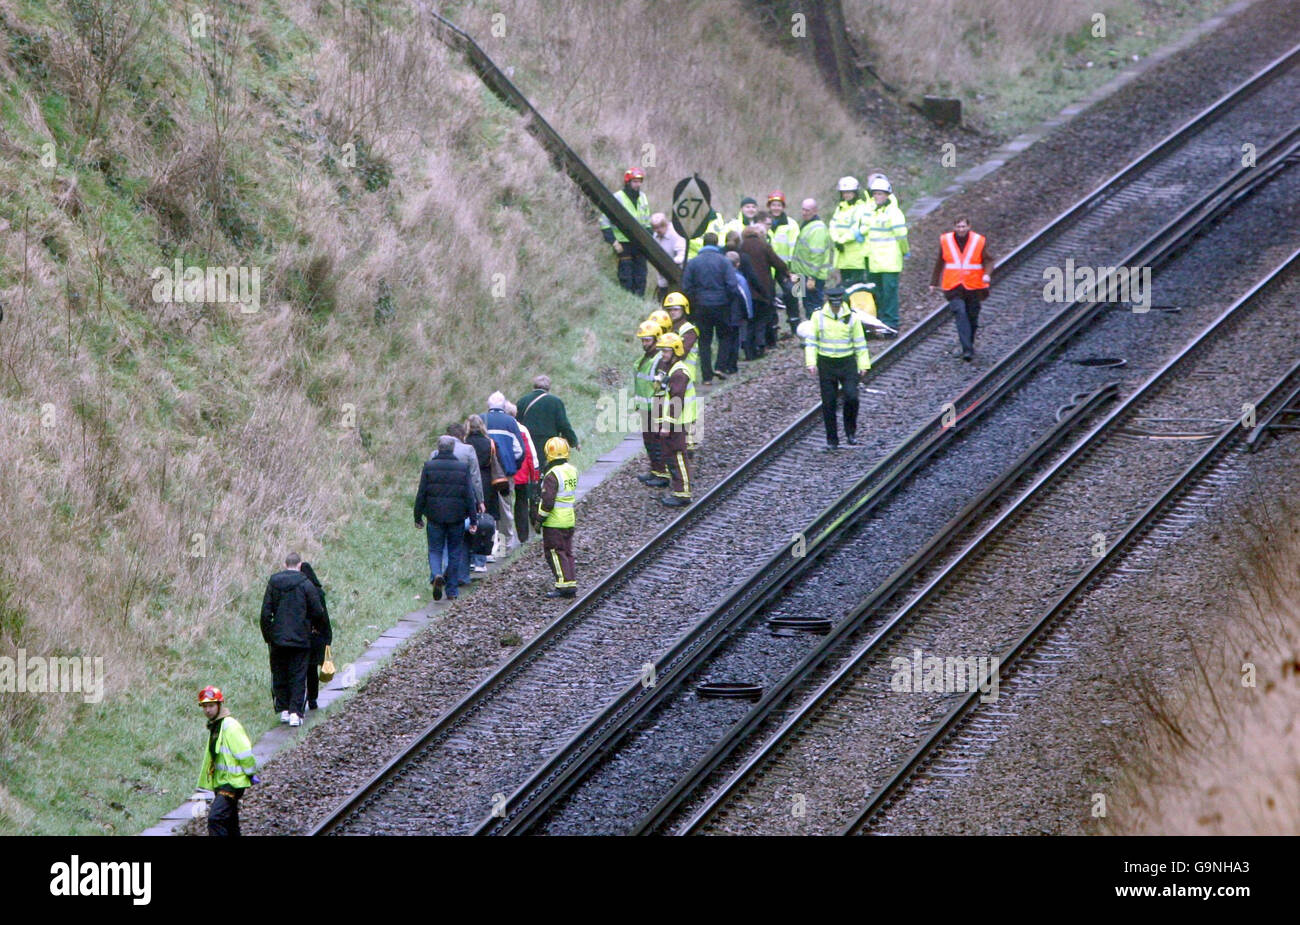 Passengers are lead to safety after a landslide derailed a train near Redhill, Surrey. Stock Photo